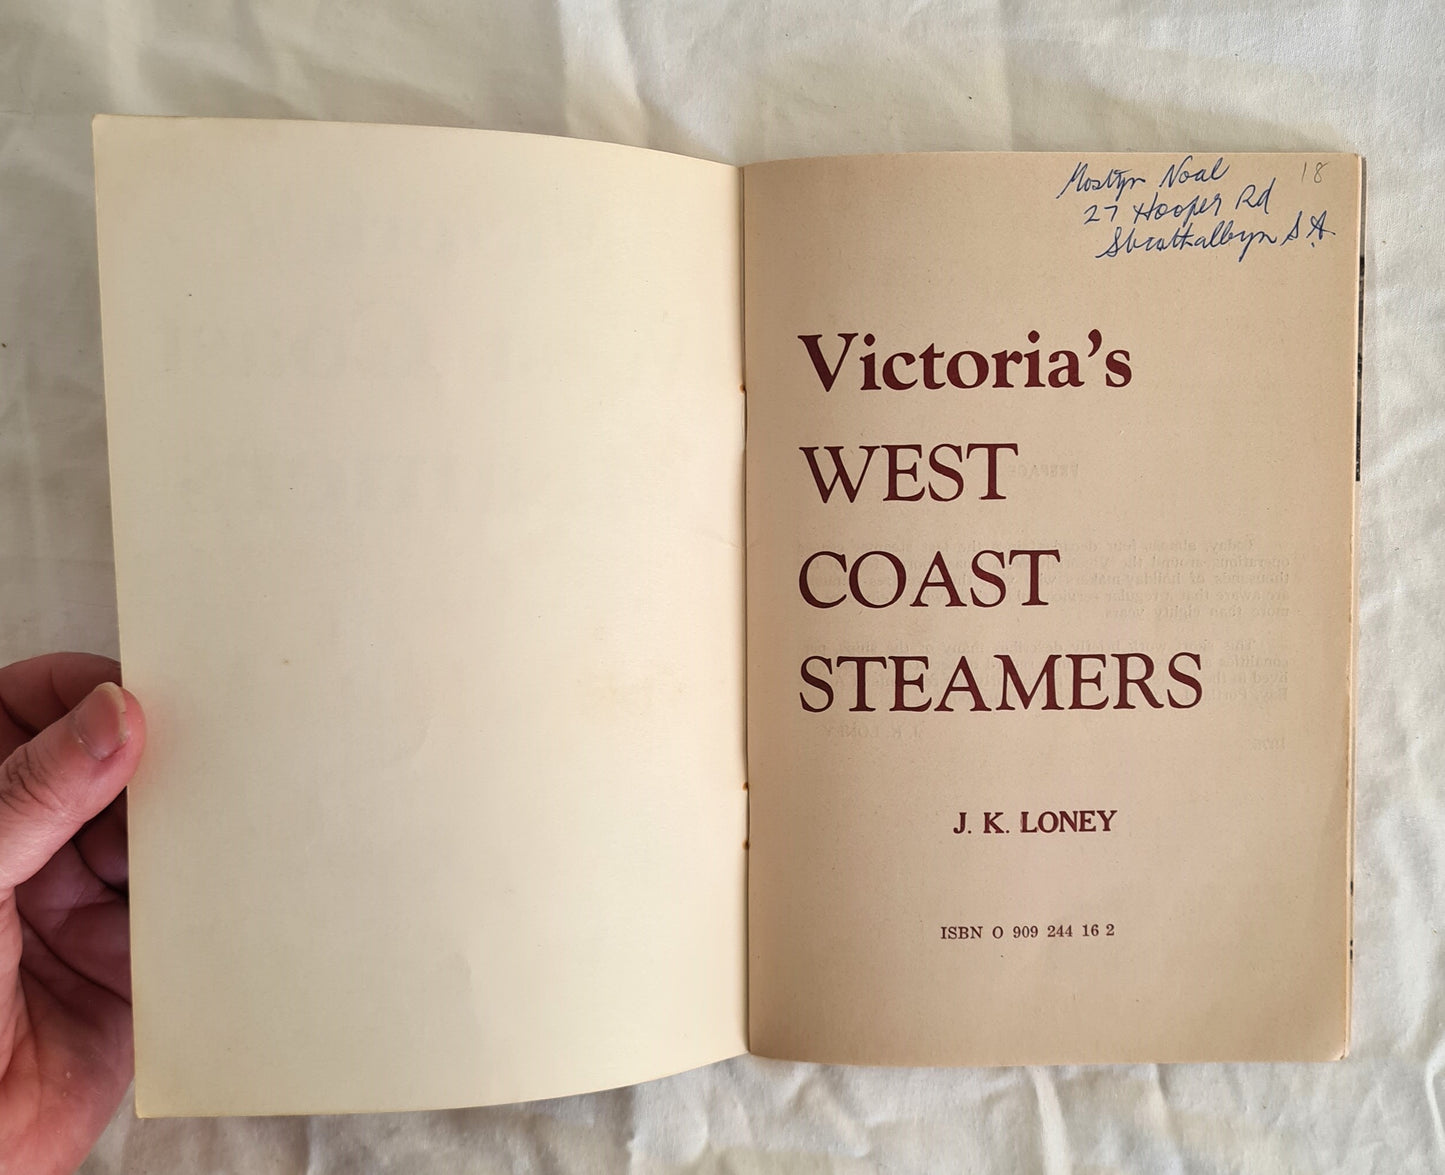 Victoria’s West Coast Steamers by J. K. Loney